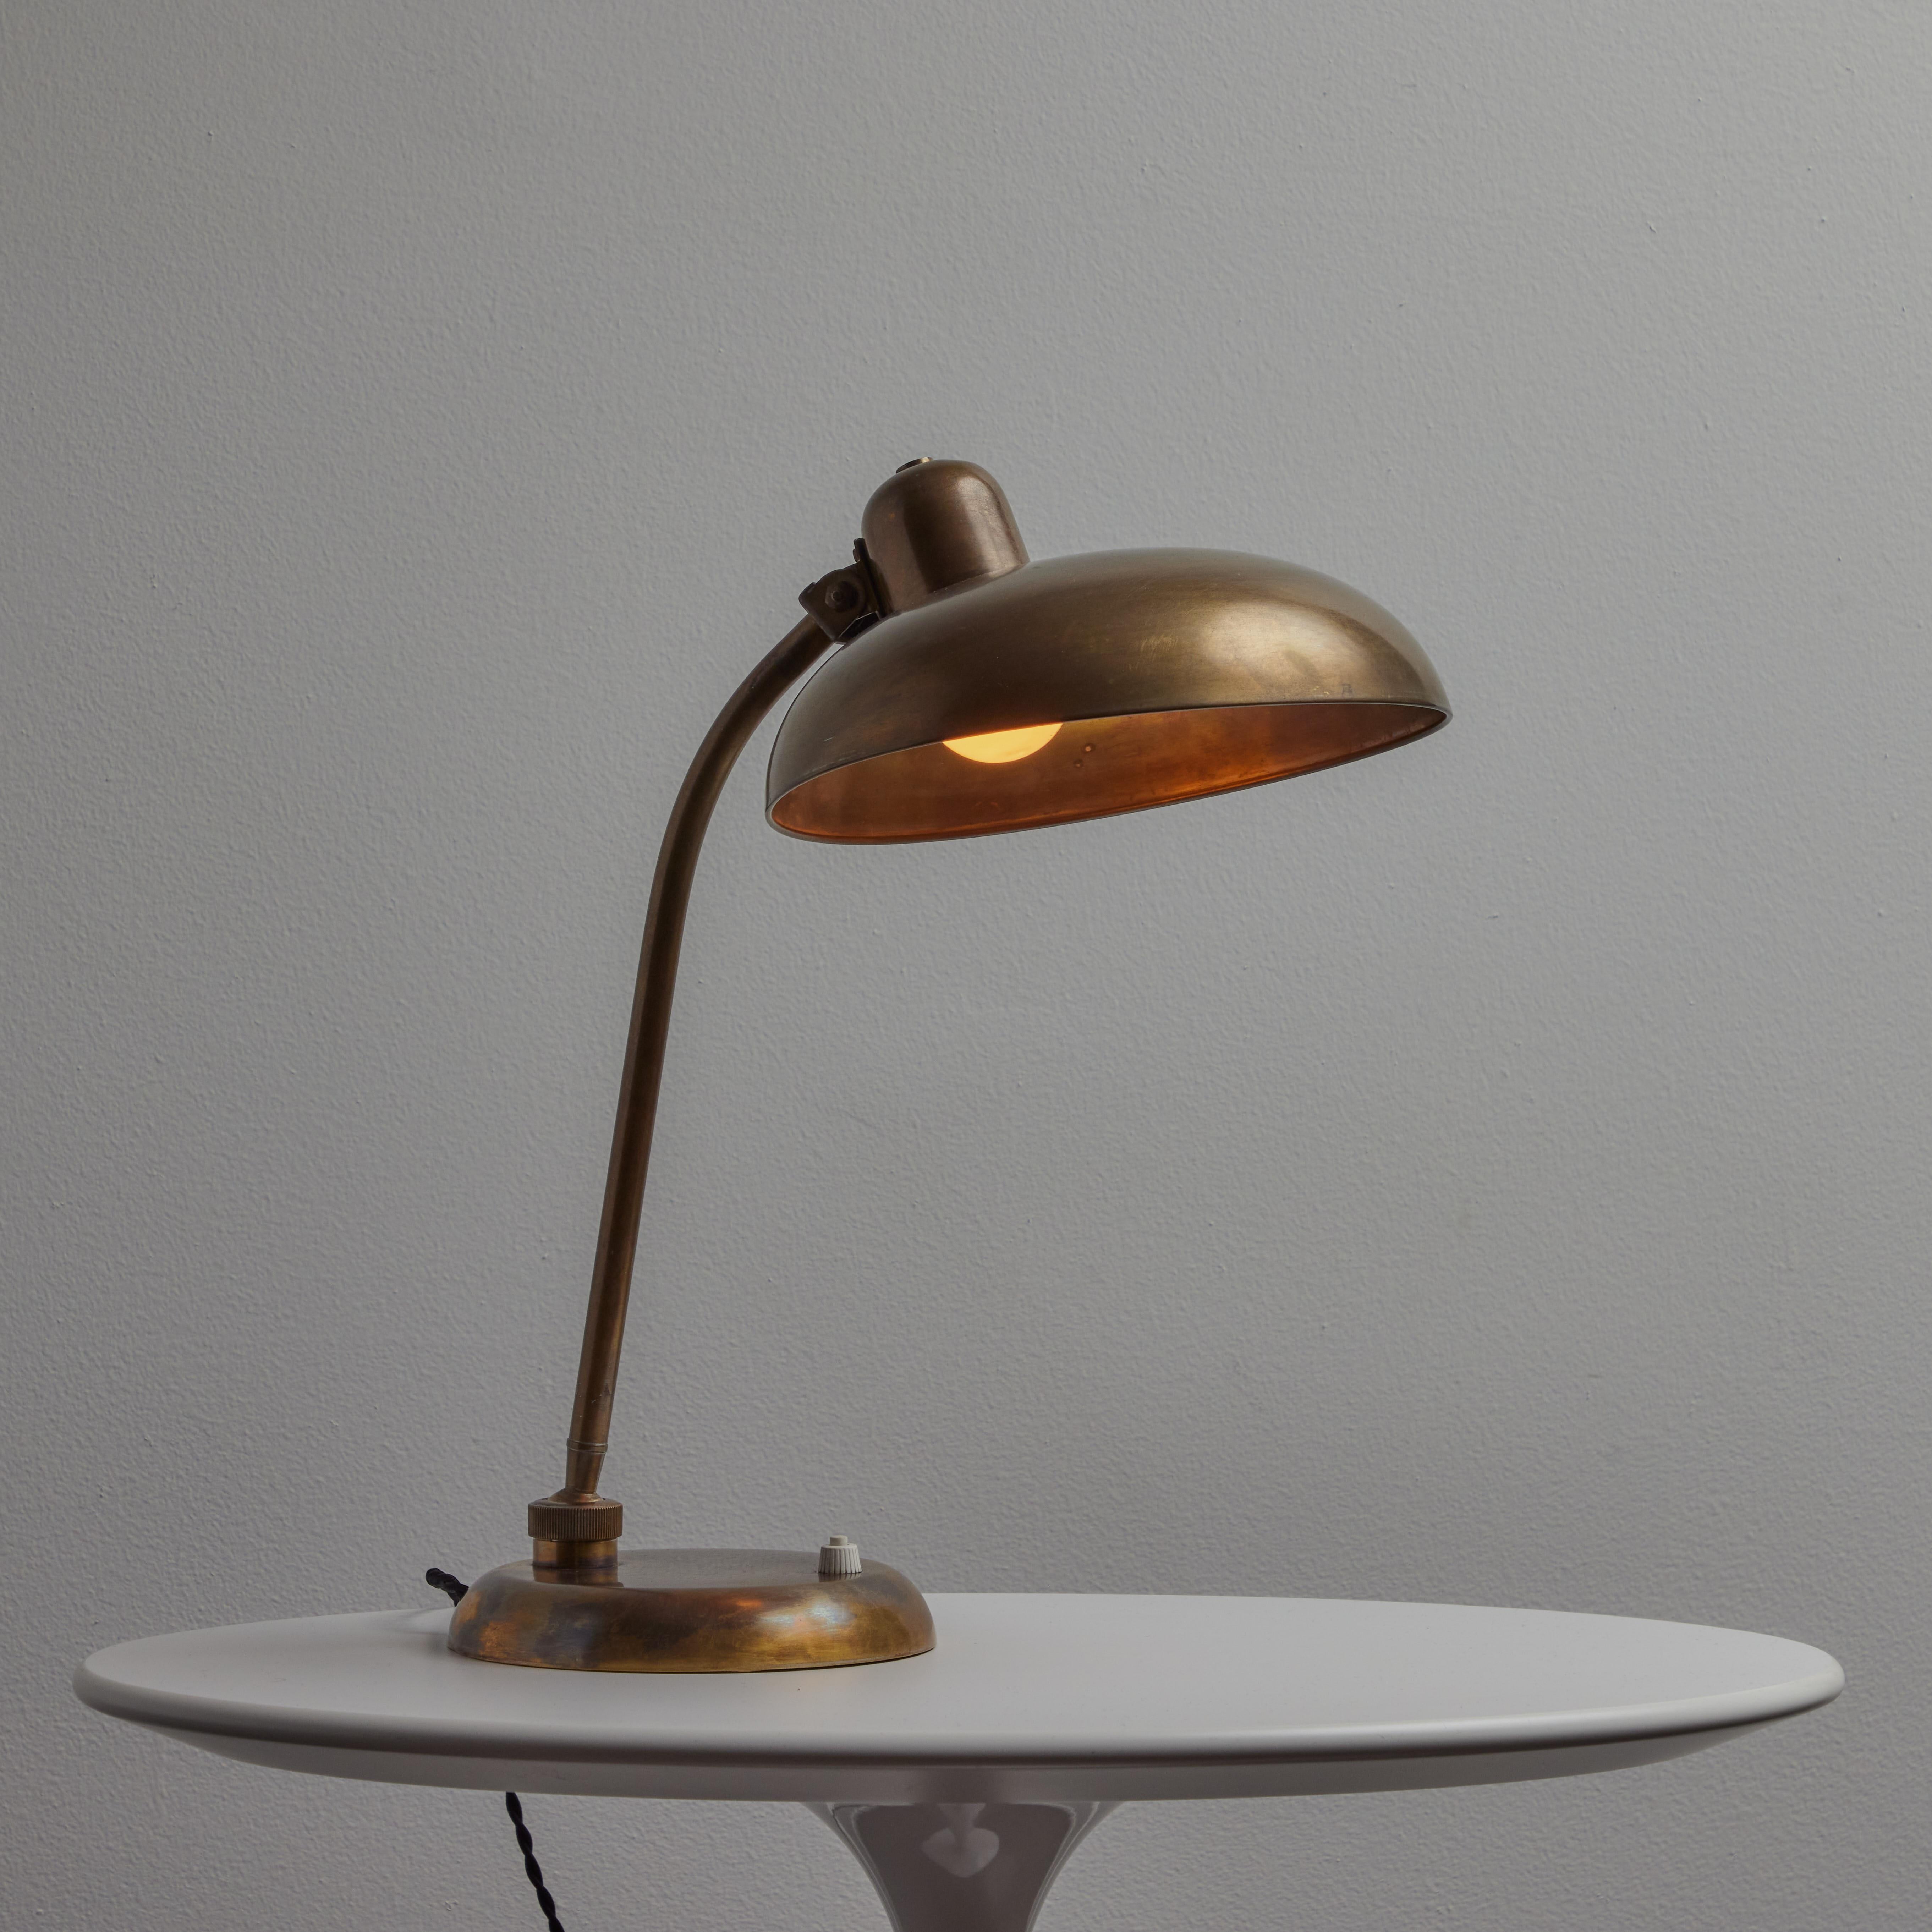 1940s Giovanni Michelucci Patinated Brass Ministerial Table Lamp for Lariolux For Sale 6